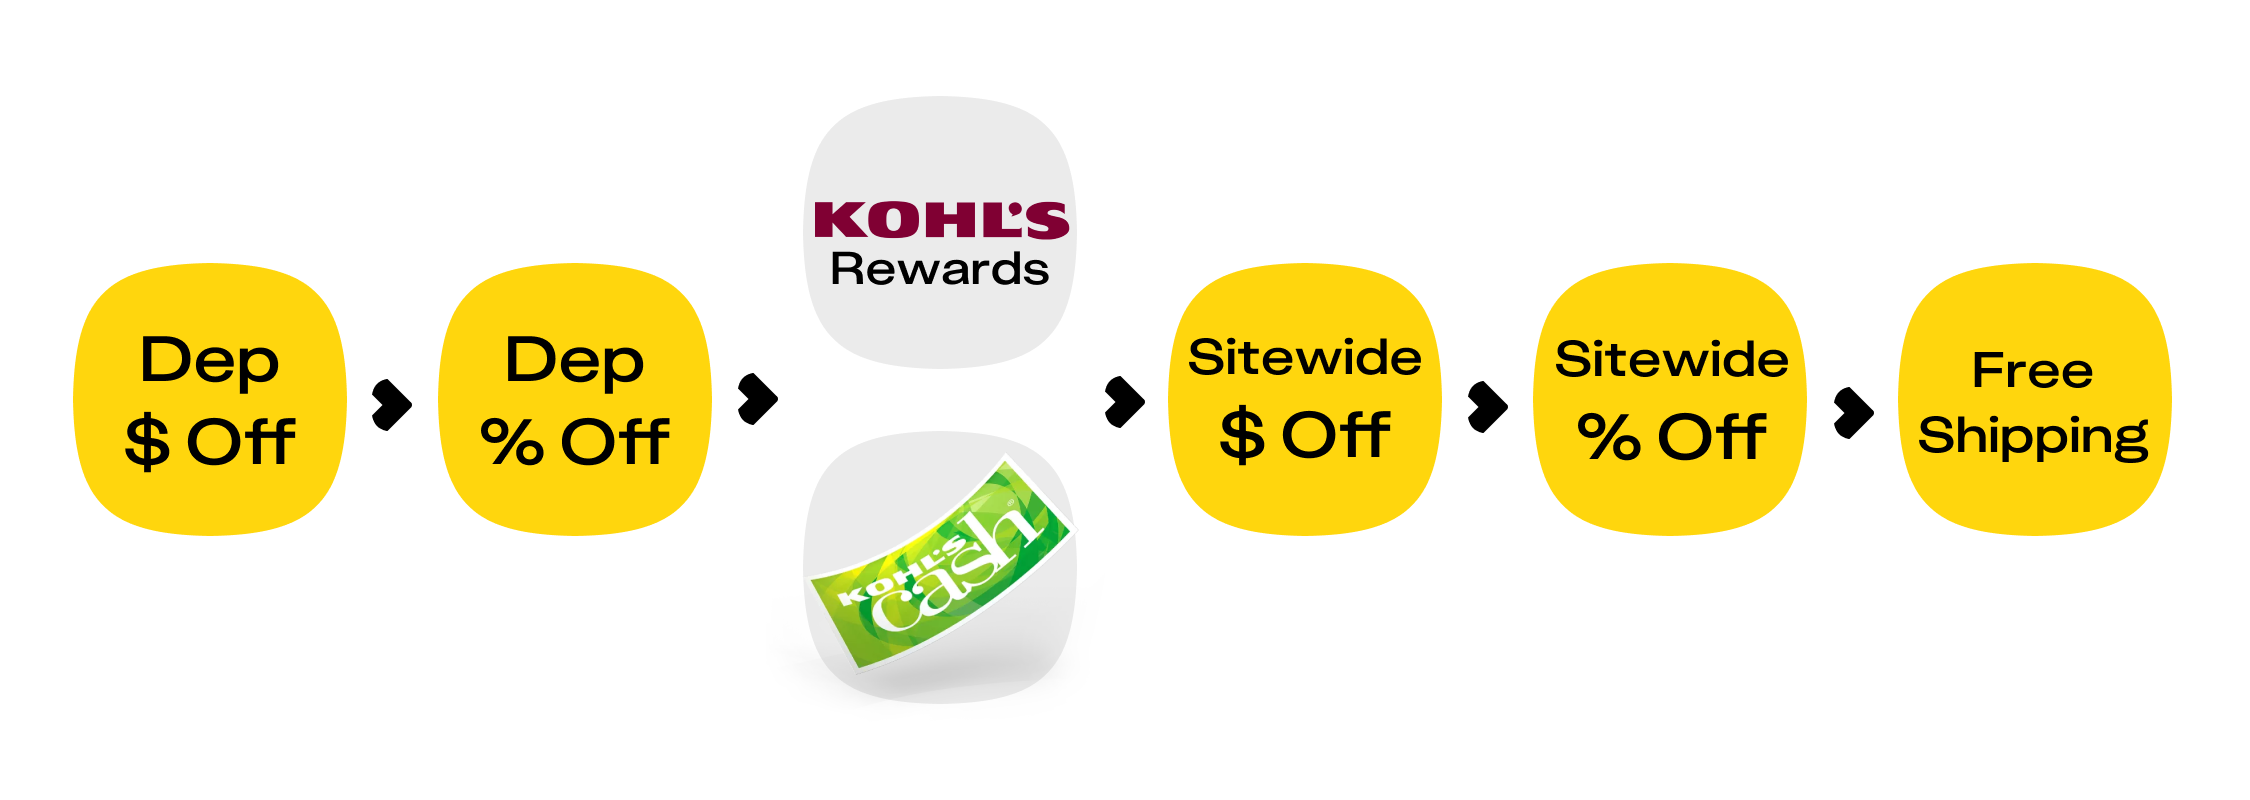 Kohl's Clearance: How to Shop It For the Biggest Savings - The